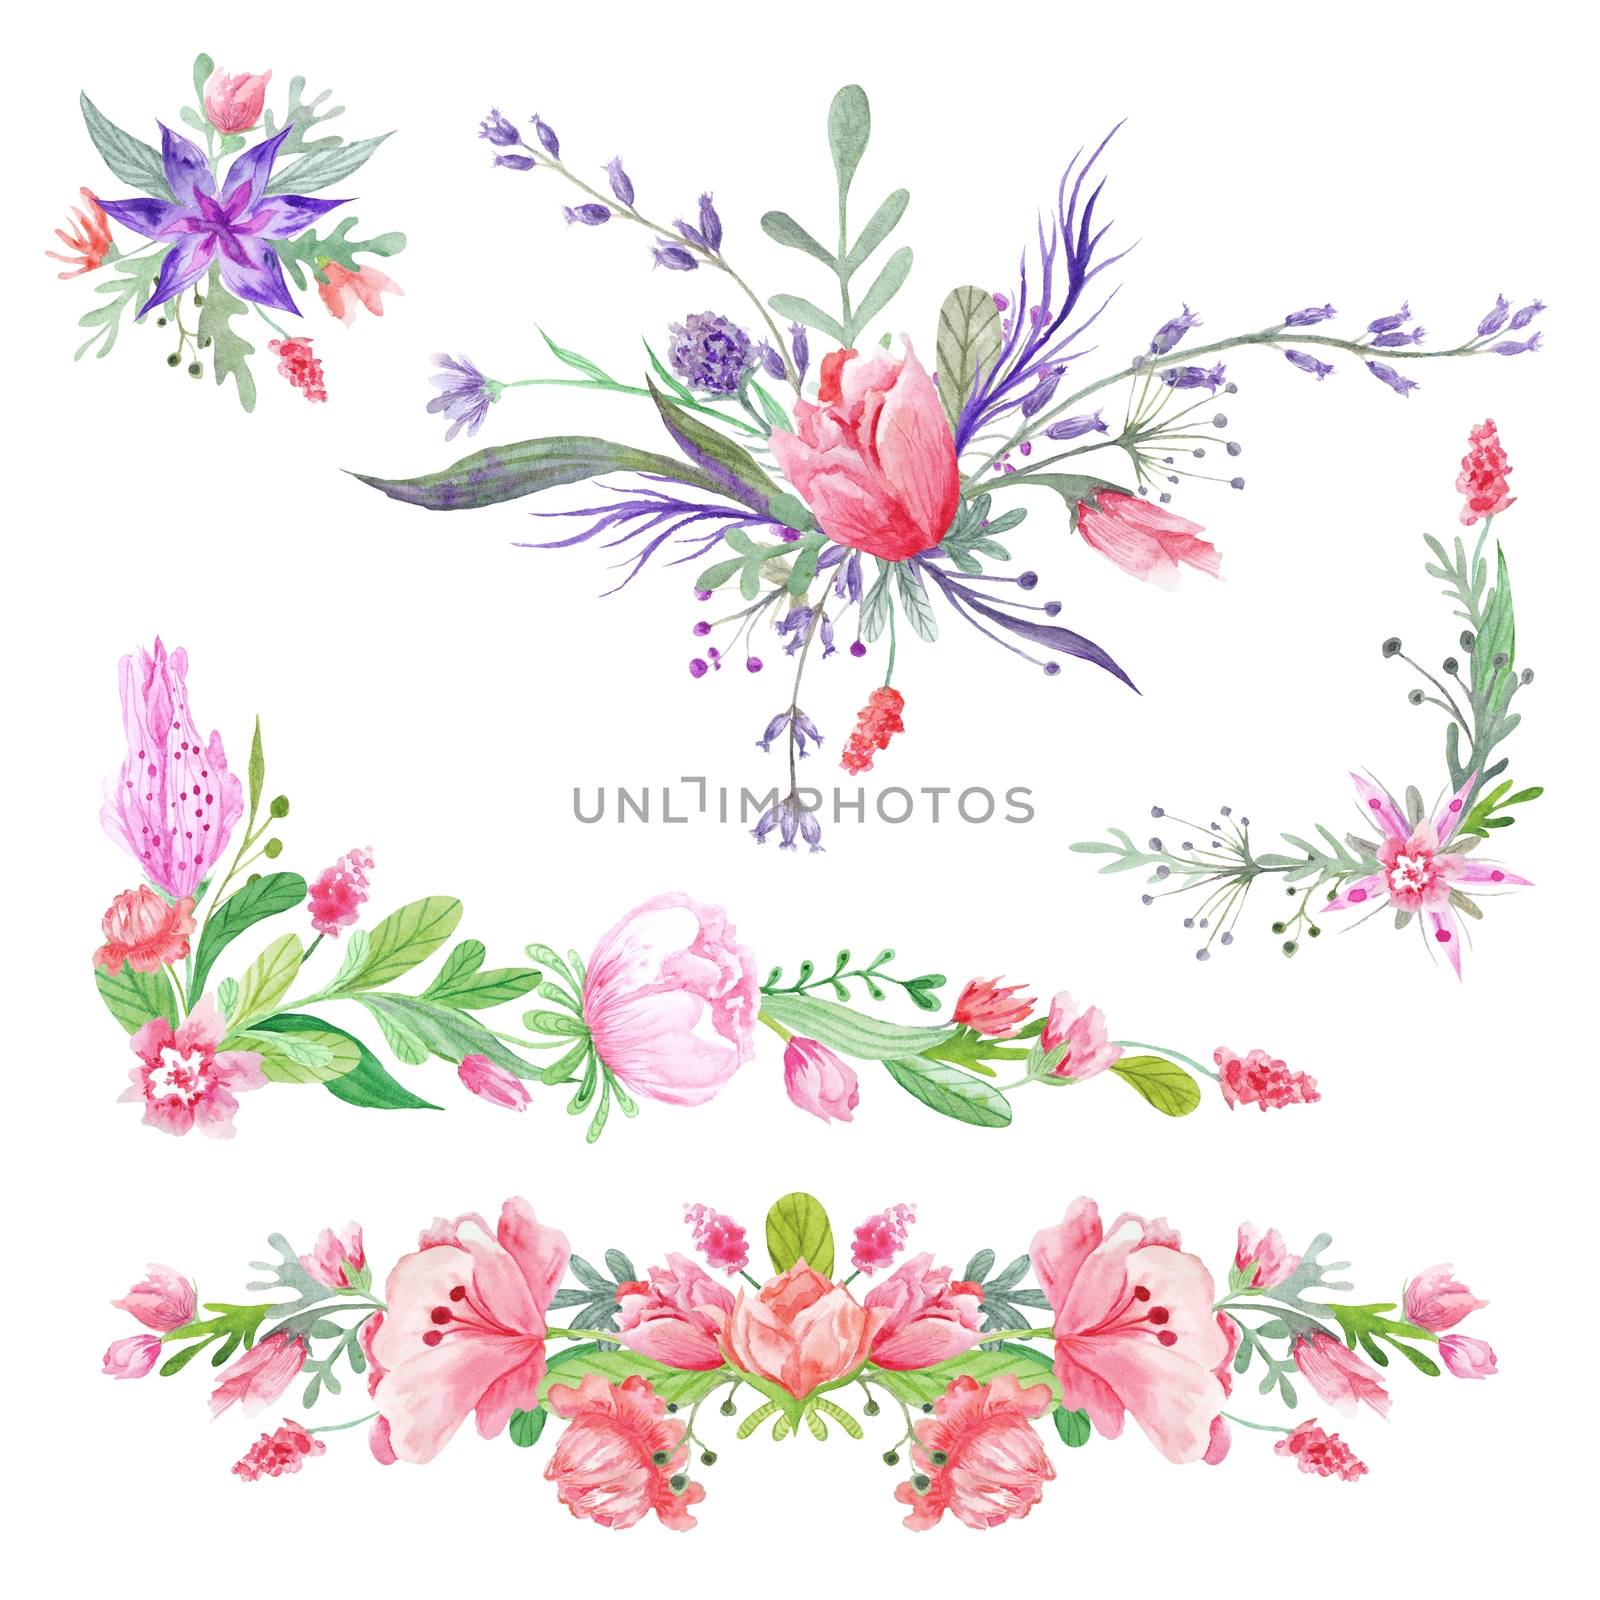 Set of botanical bright floristic vignette compositions isolated on white background for wedding, event design